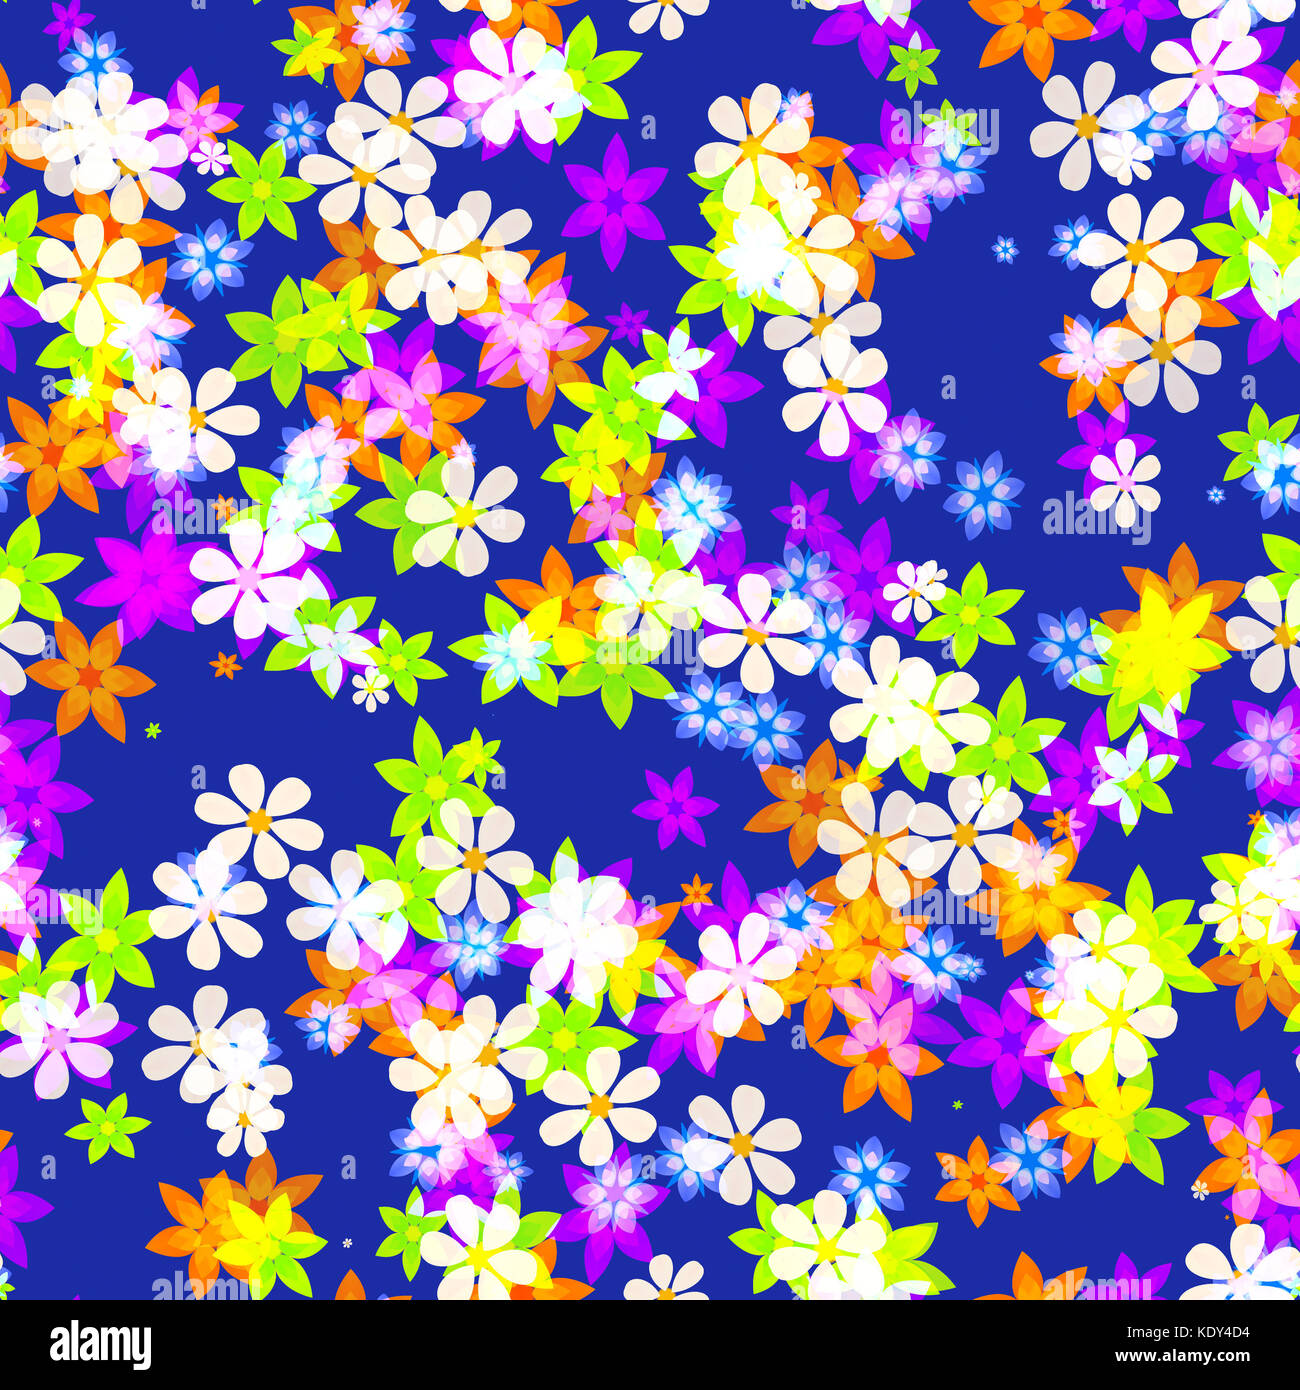 Colorful flowers scattered to form a seemless background Stock Photo ...